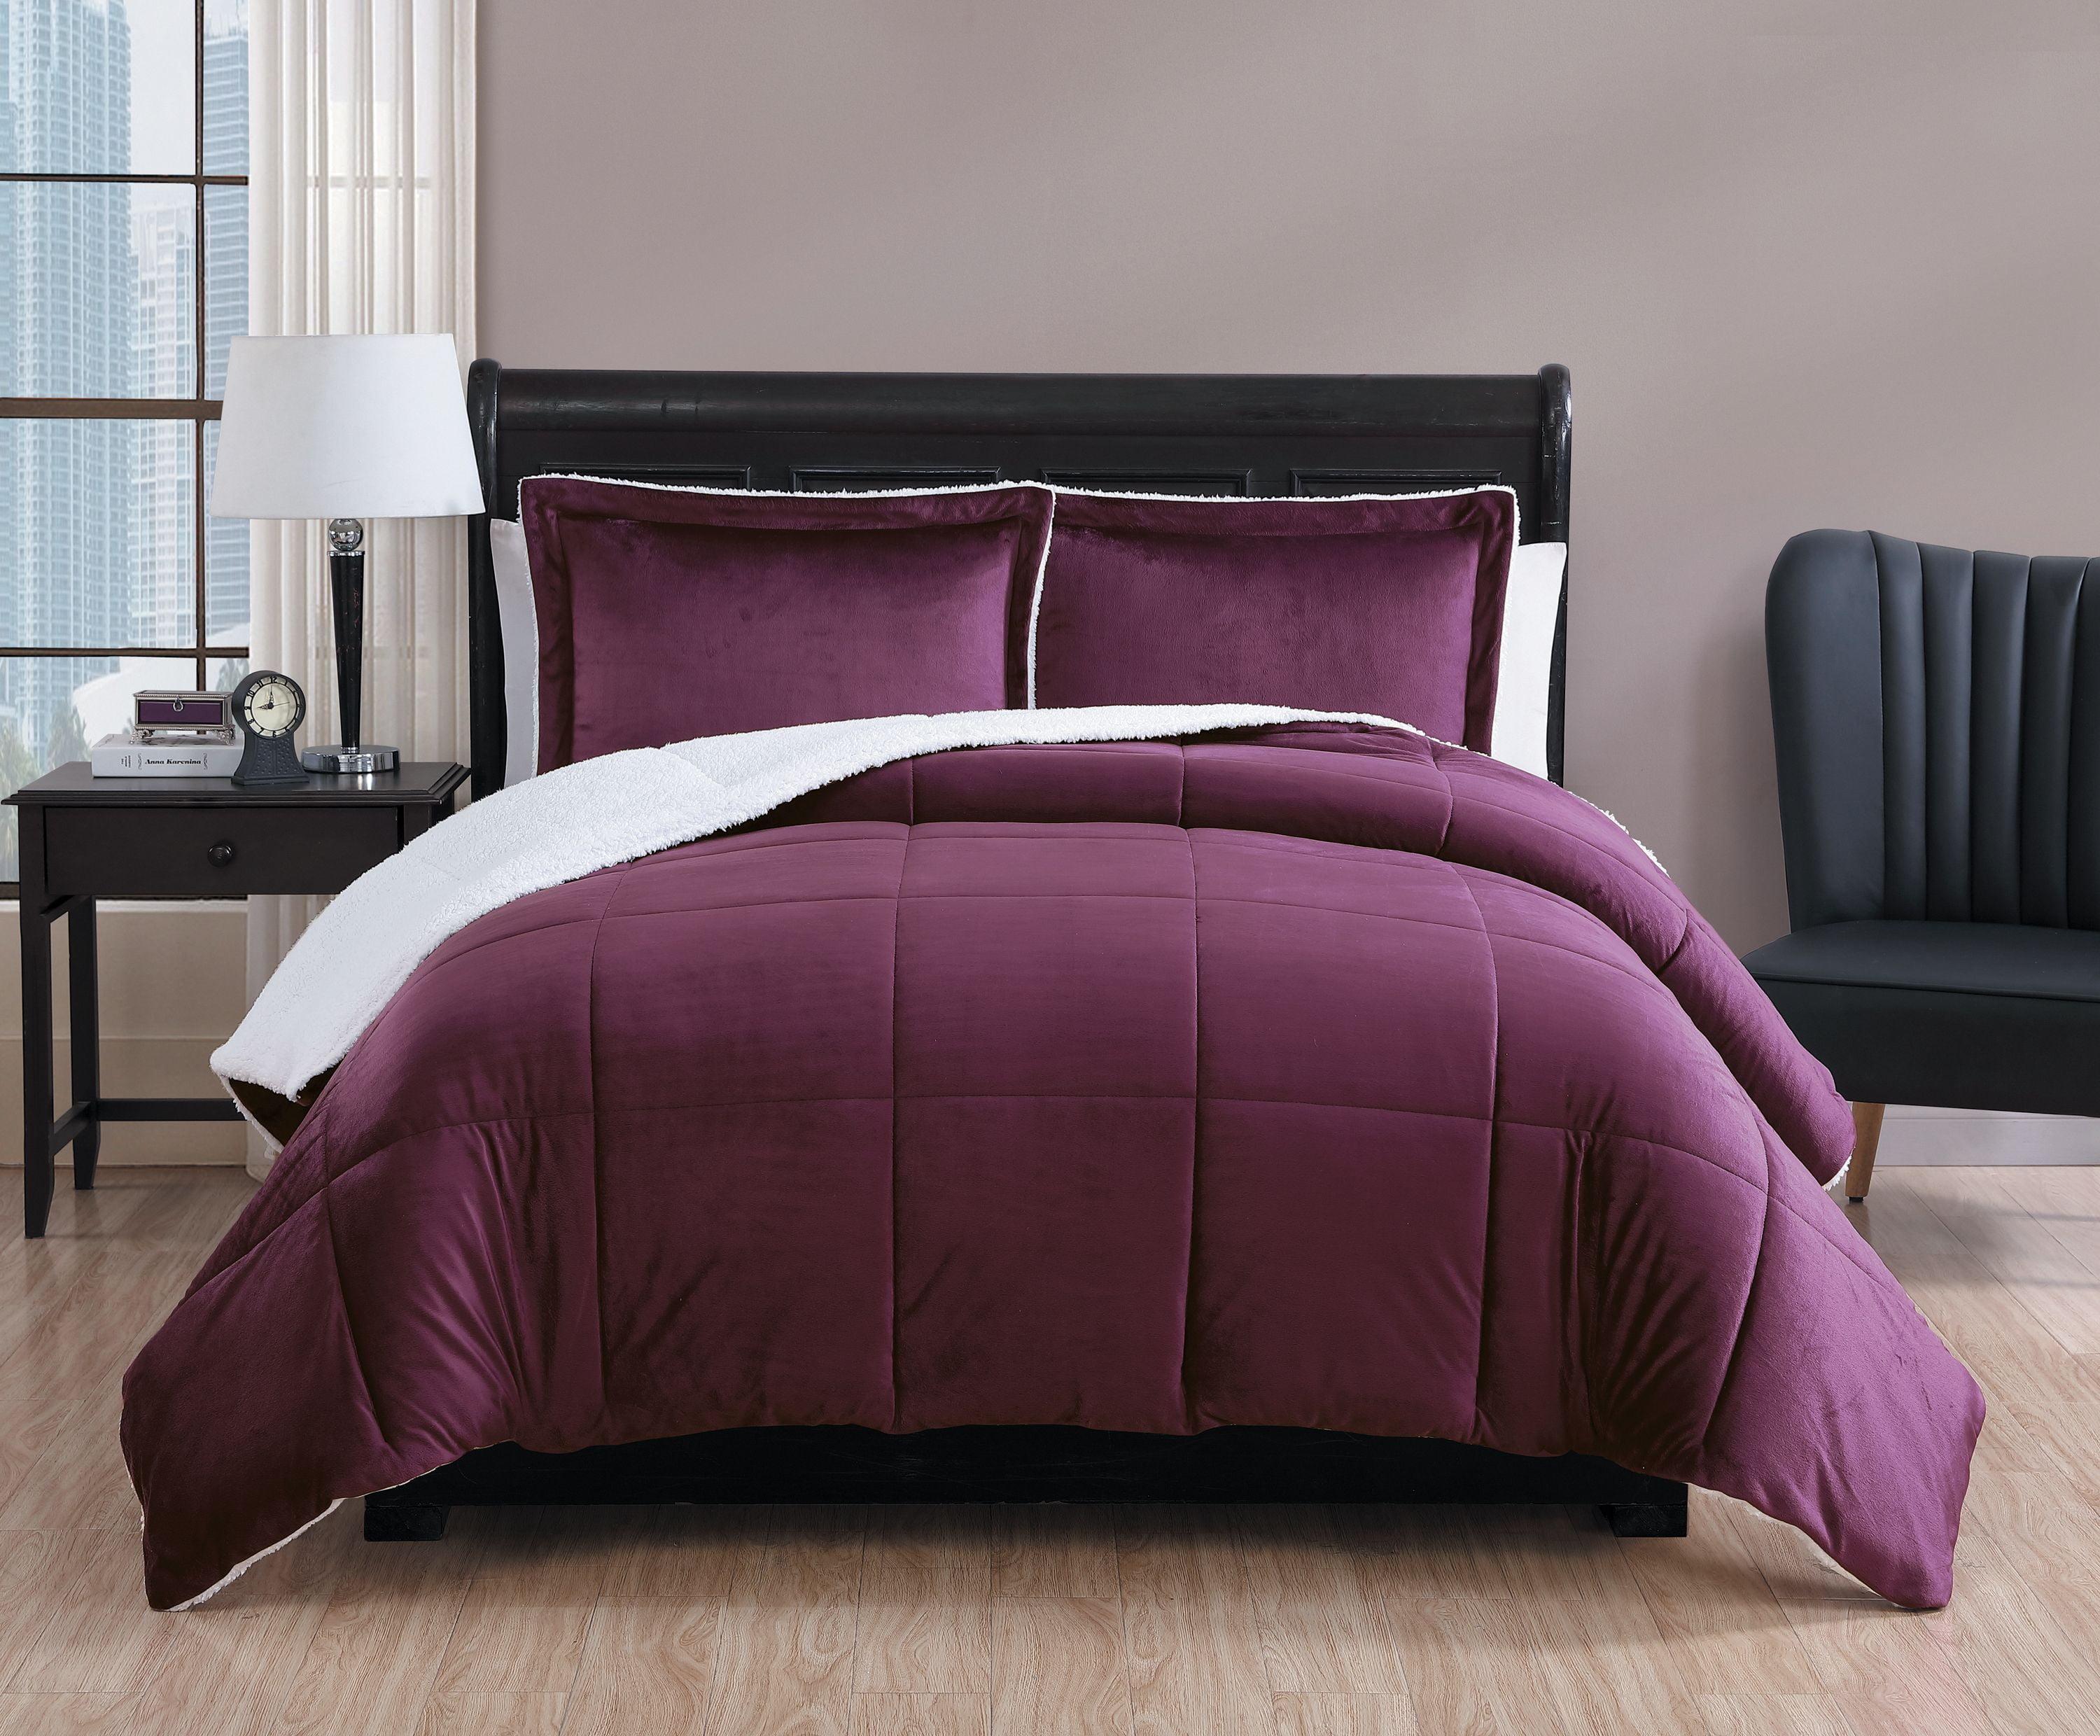 VCNY Home Micro Mink Sherpa 3-Piece Comforter Set, King, in Purple ...